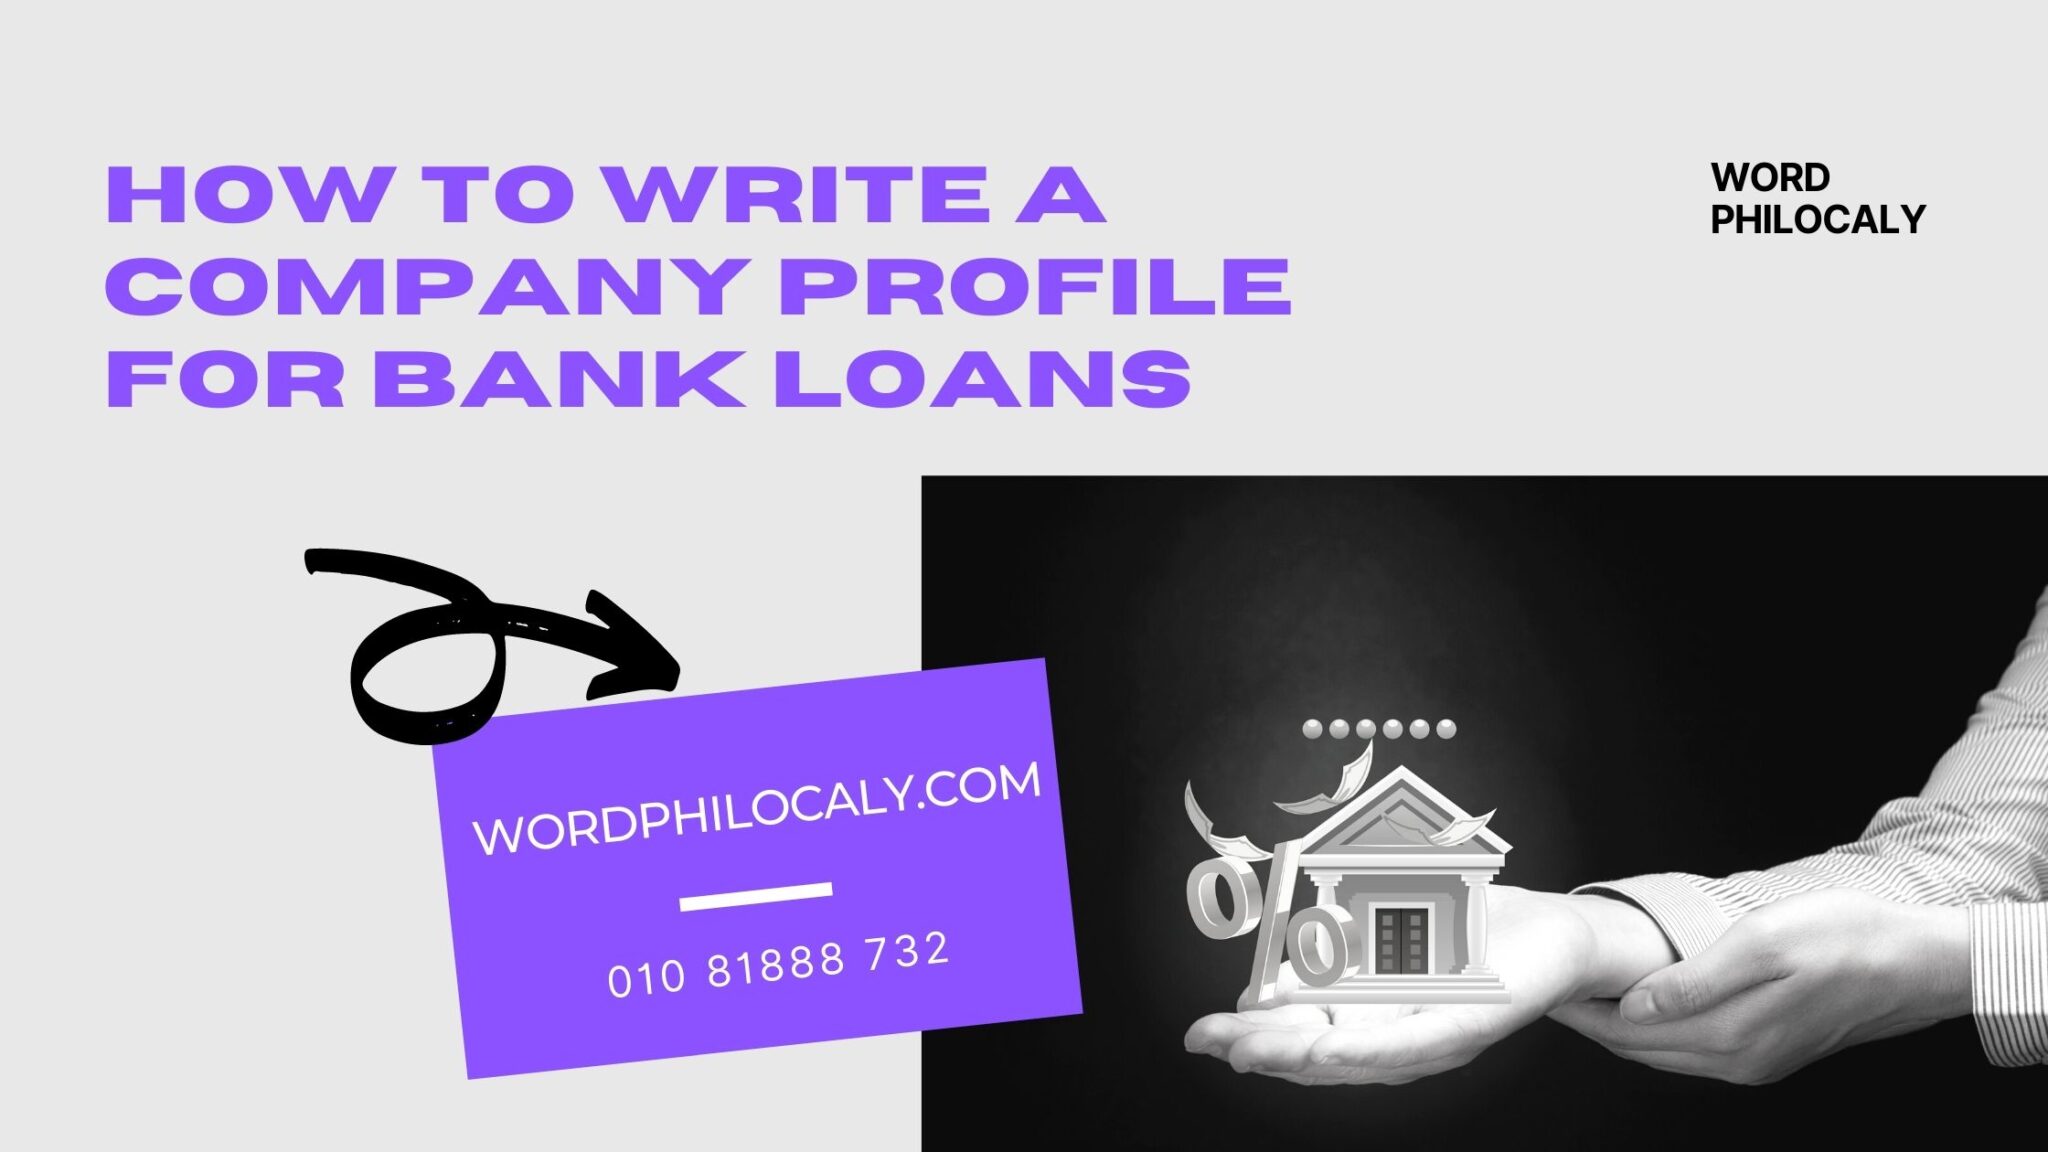 How to Write a Company Profile for Bank Loans? - Word Philocaly